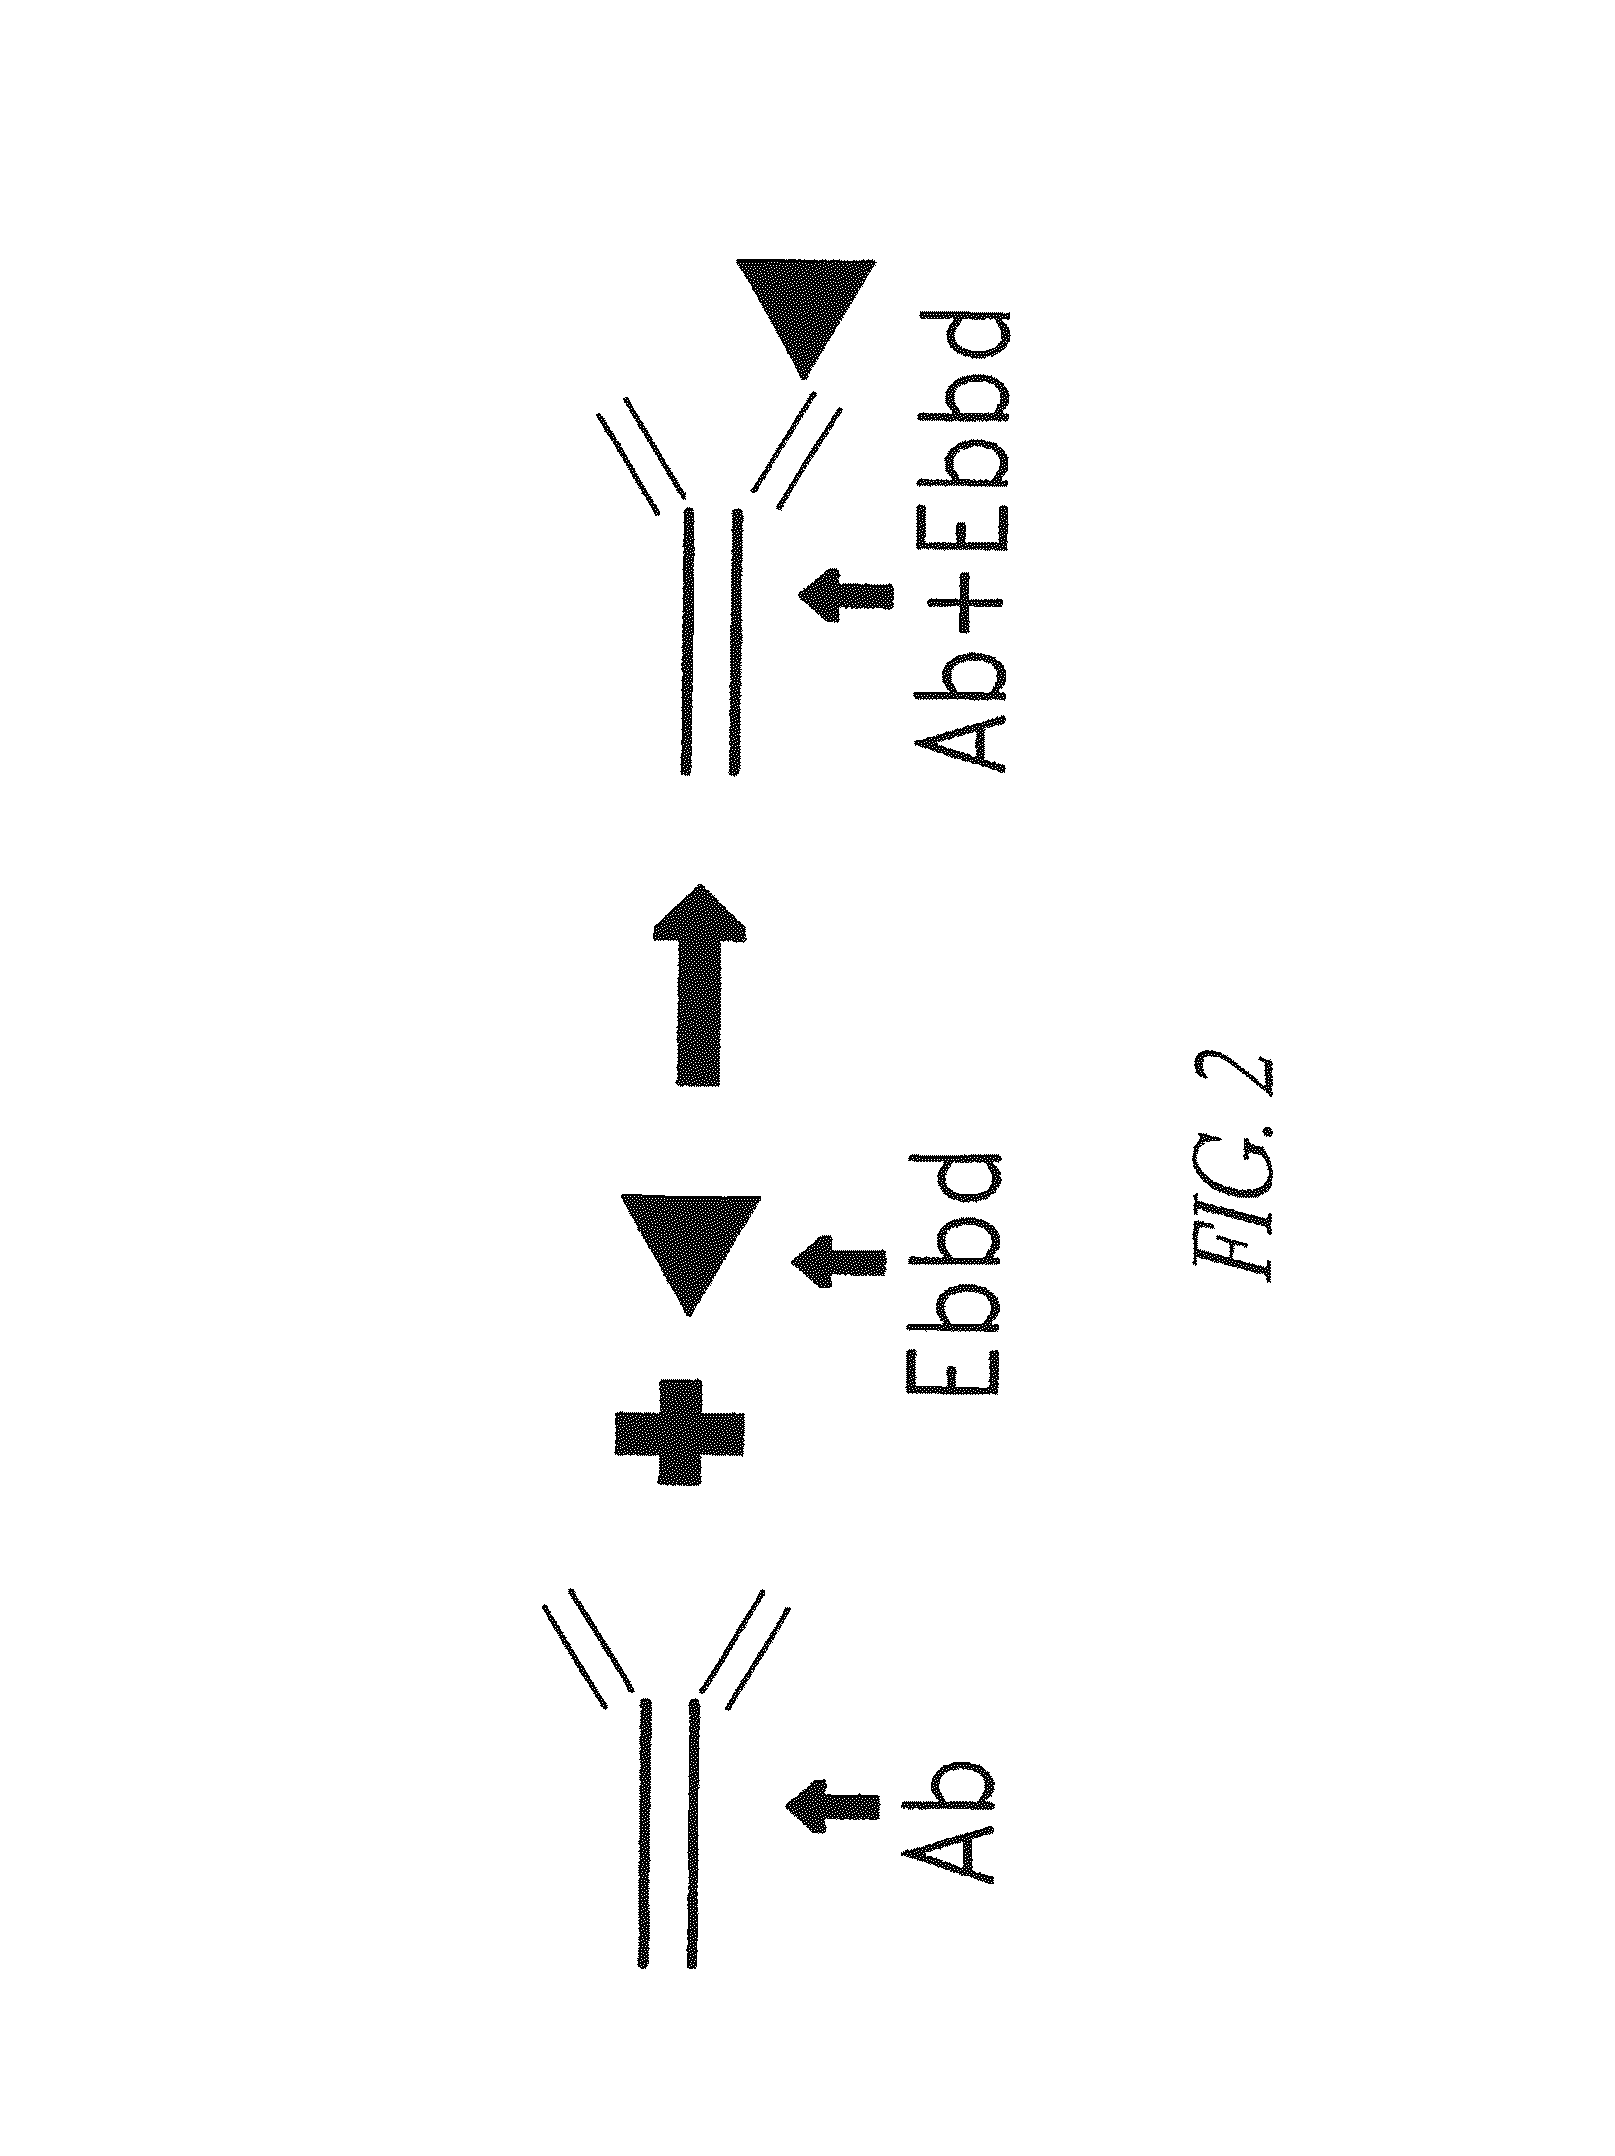 Method for making targeted therapeutic agents